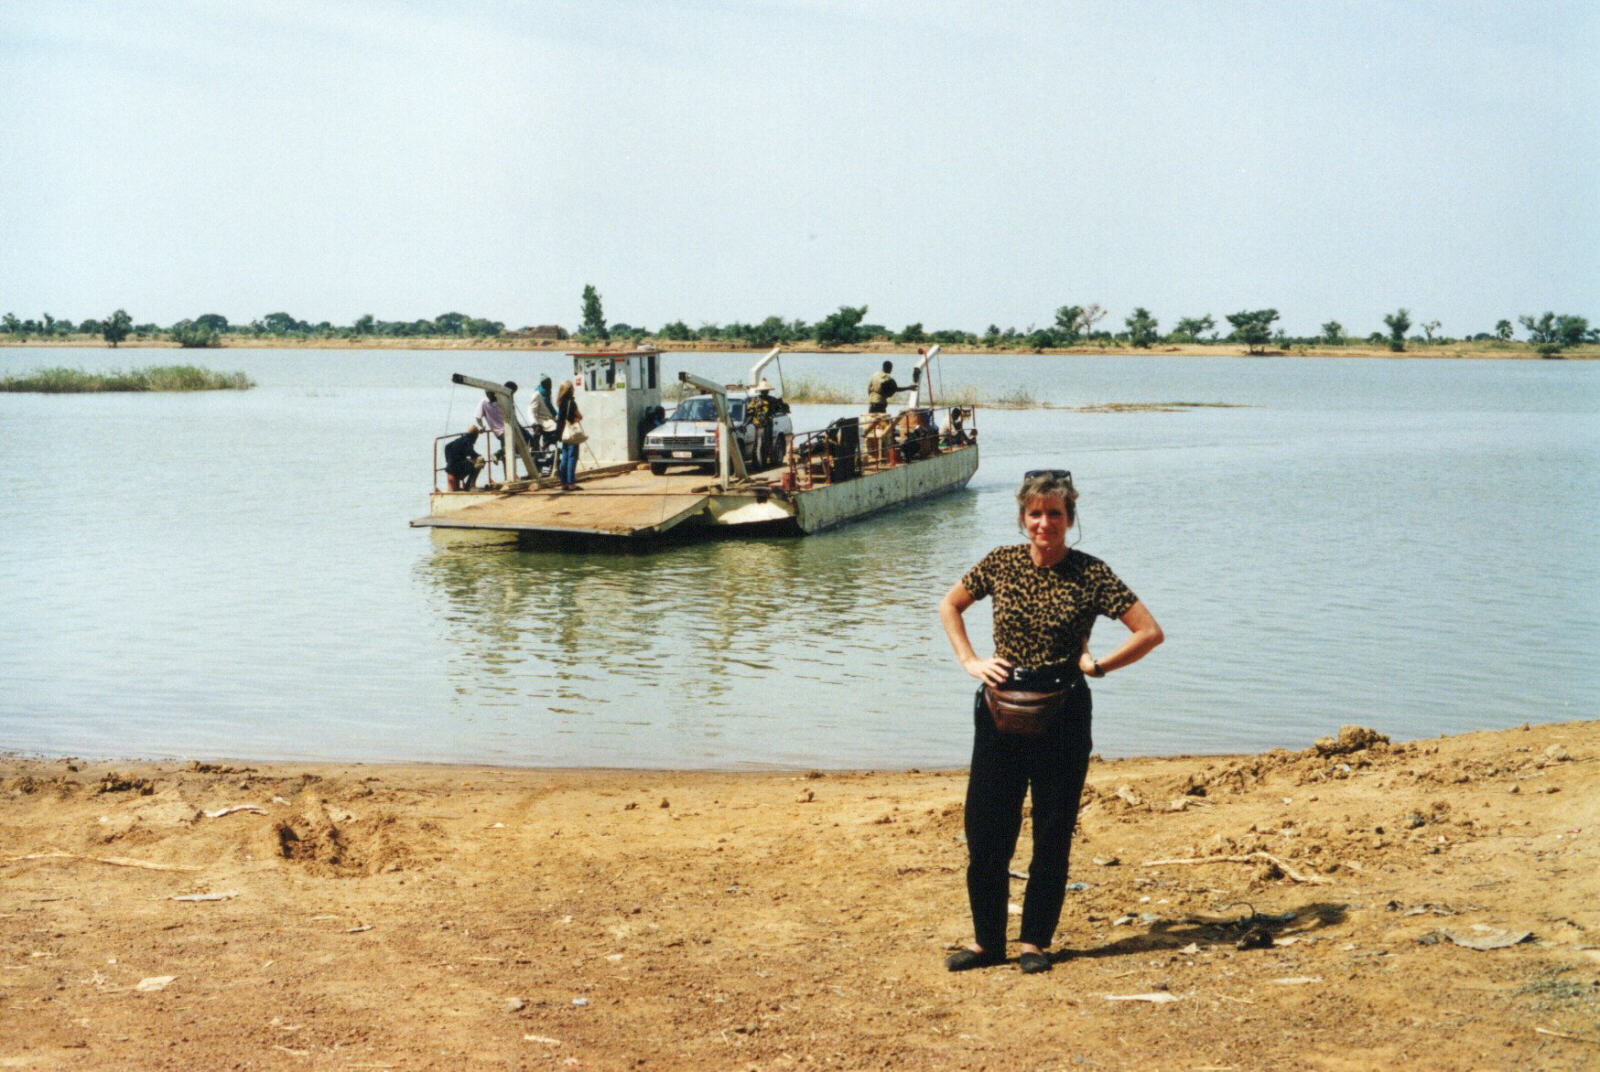 Ferry across the river Bani on the way to Djenne, Mali